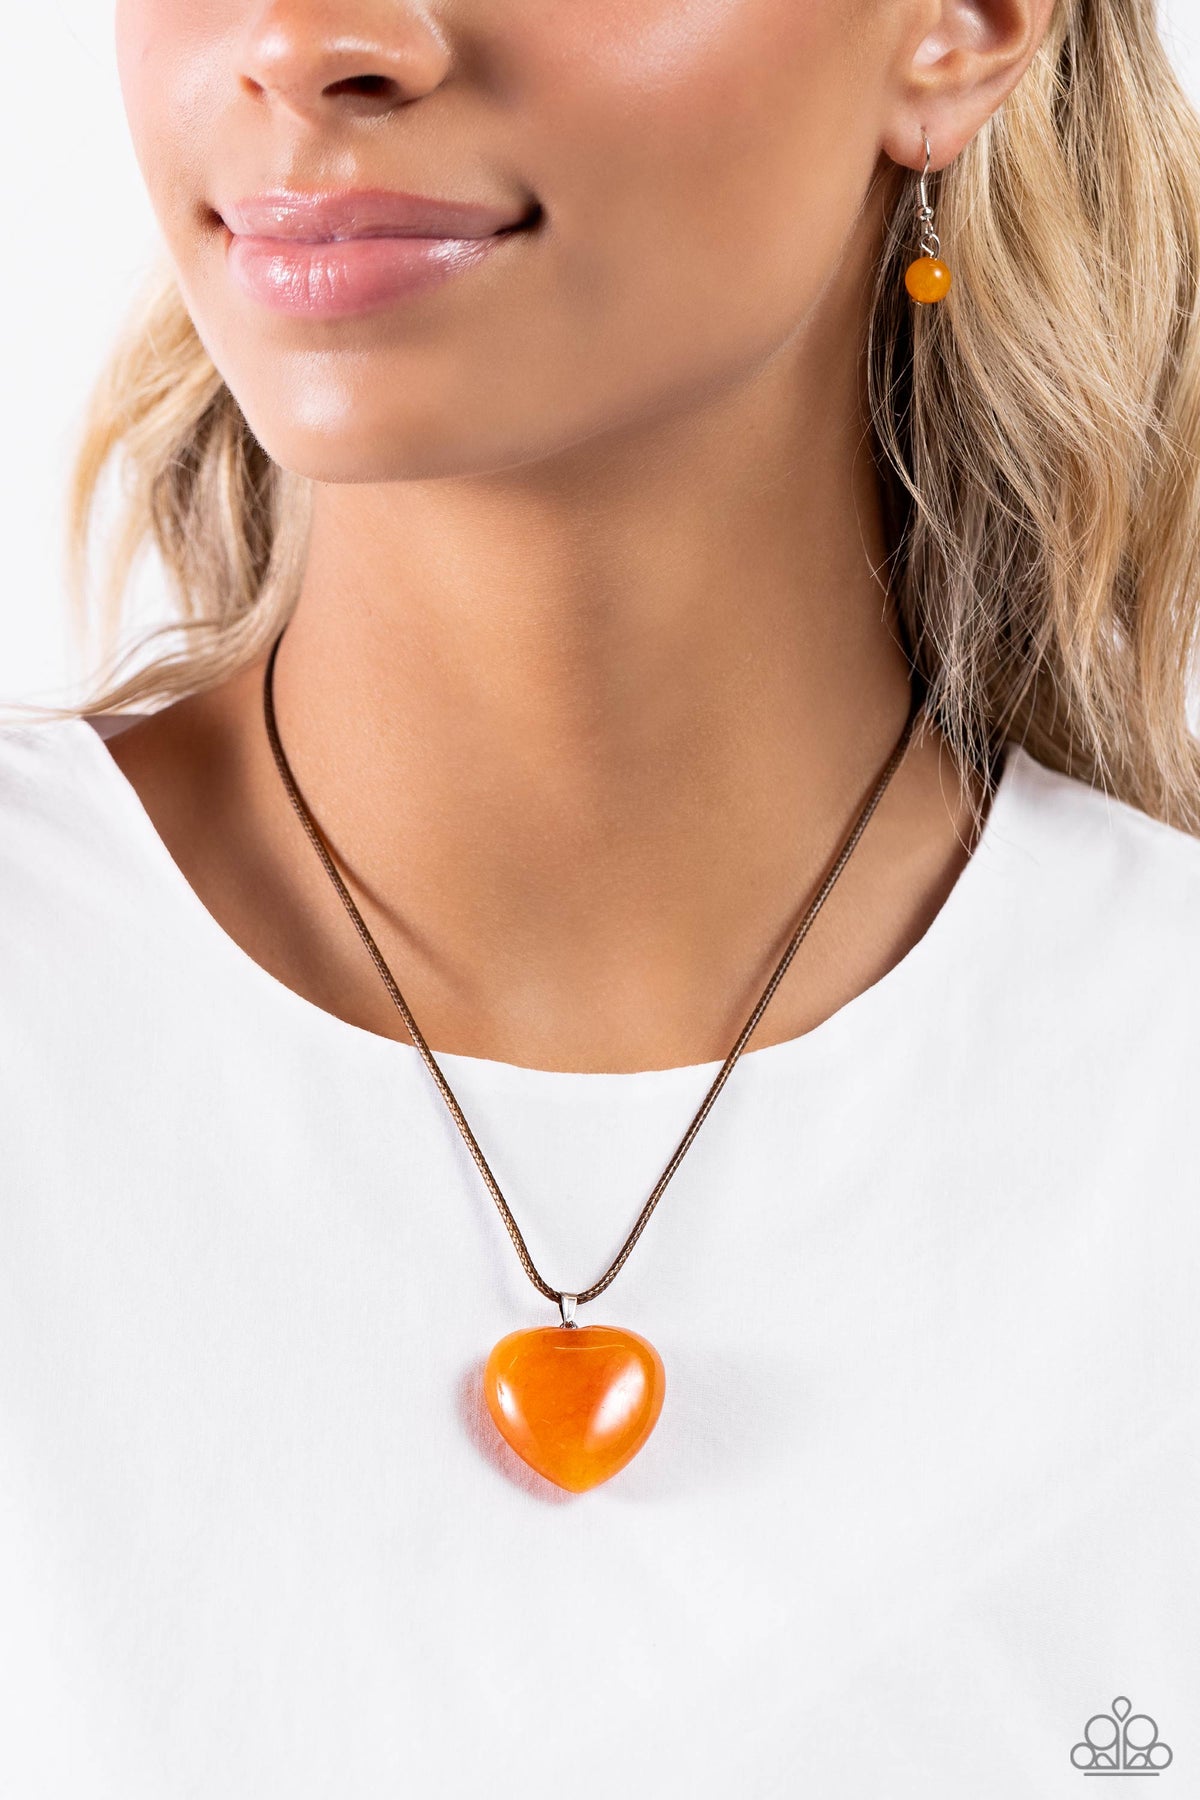 Serene Sweetheart Orange Stone Heart Necklace - Paparazzi Accessories-on model - CarasShop.com - $5 Jewelry by Cara Jewels